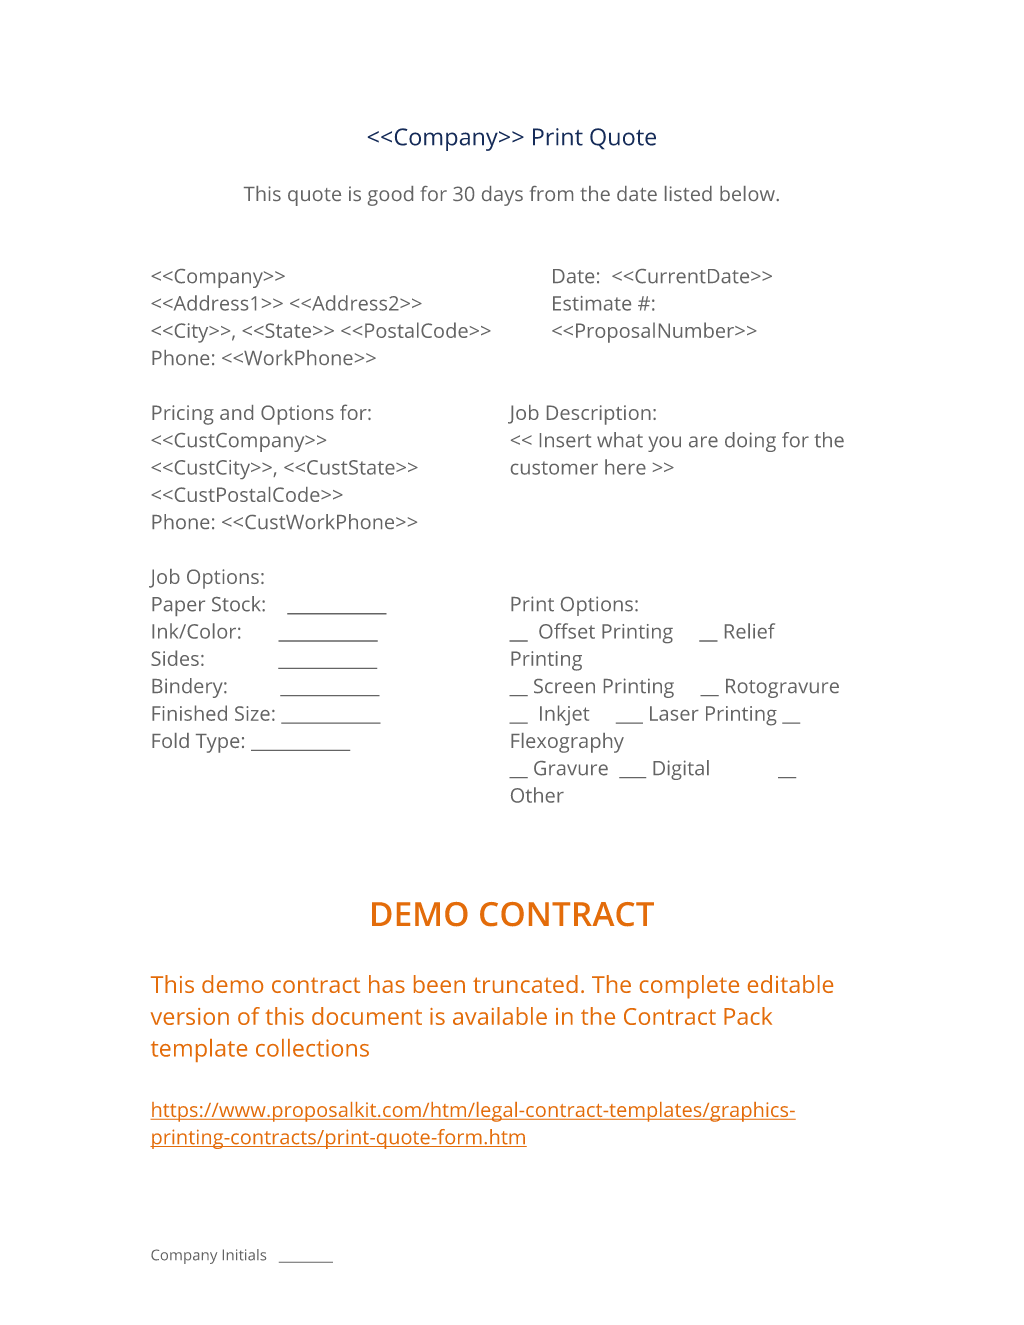 Print Quote Form